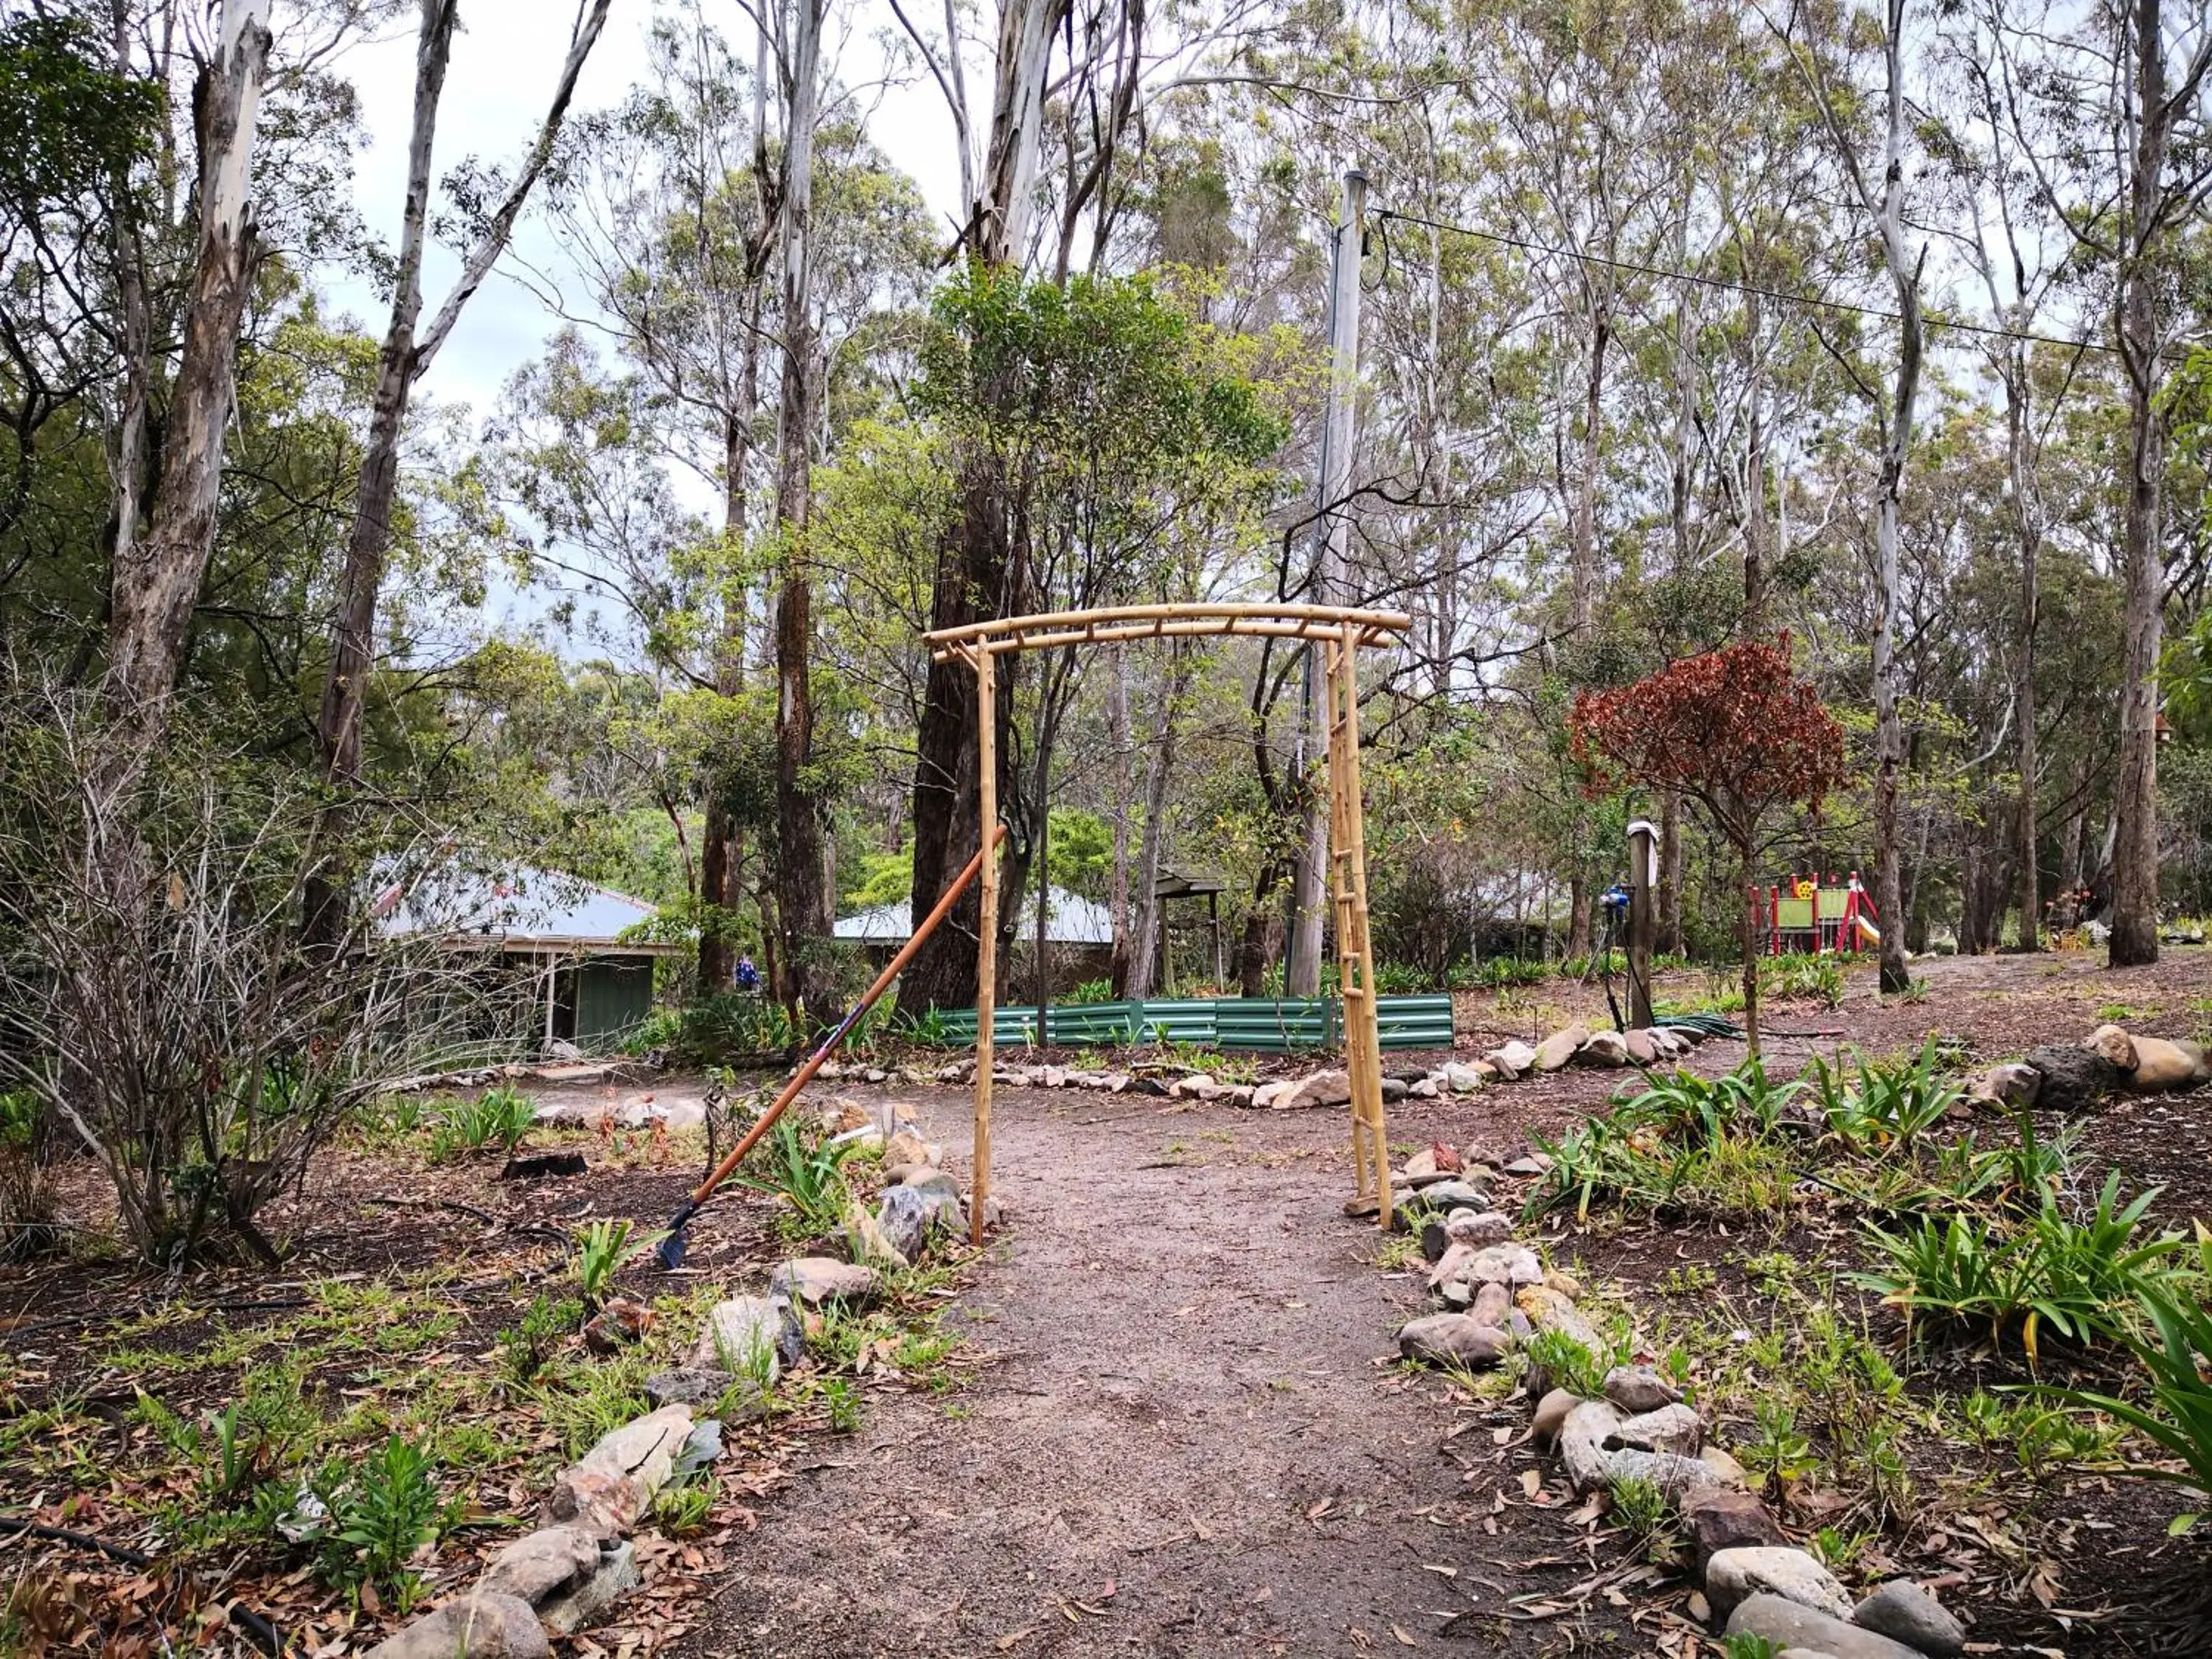 Children's Play Area in Kalimna Woods Cottages